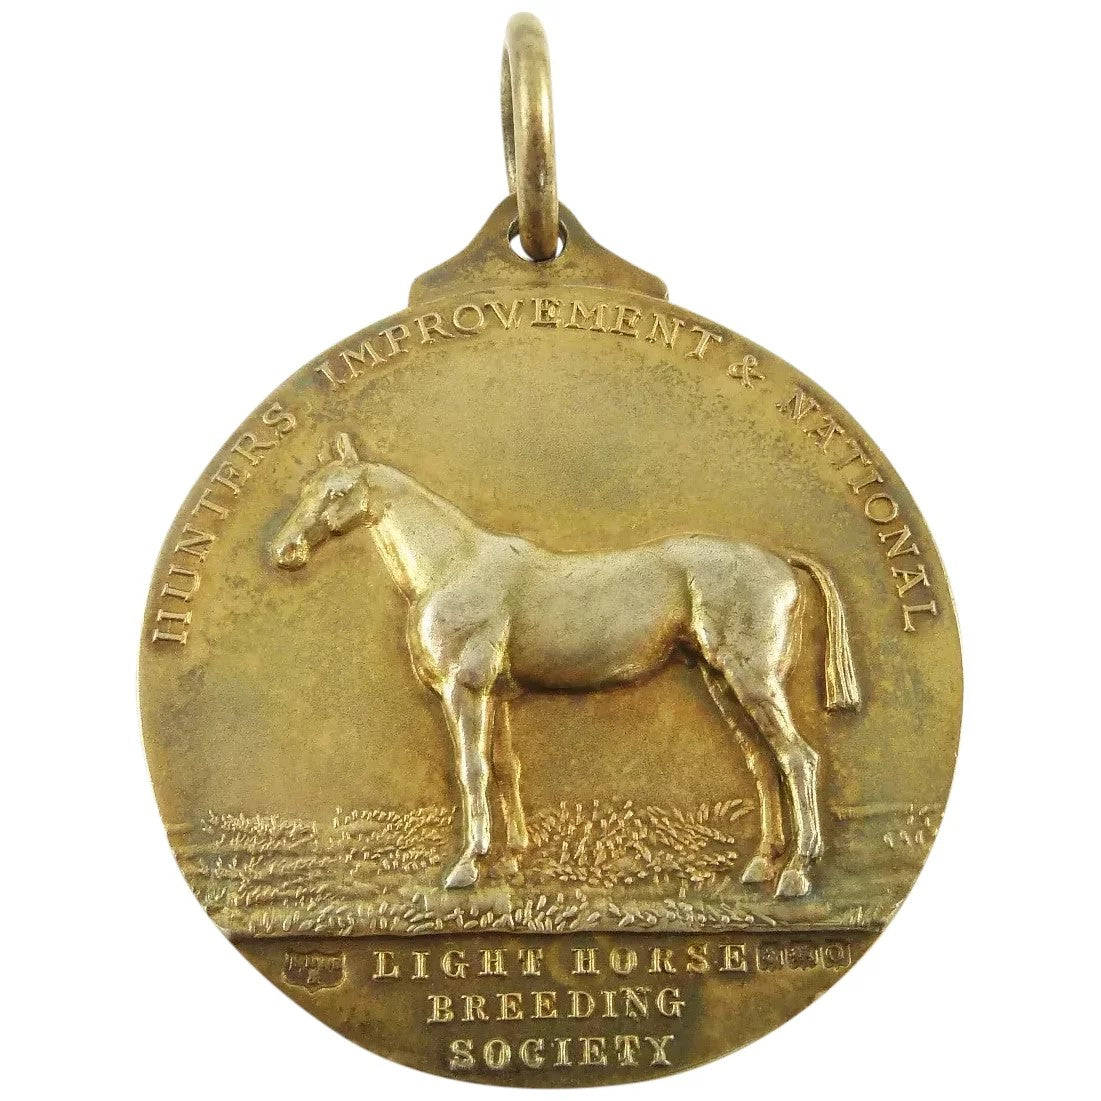 Antique Sterling Silver & Vermeil Medal Watch Fob, Marked For The Light Horse Breeding Society - 43 Chesapeake Court Antiques